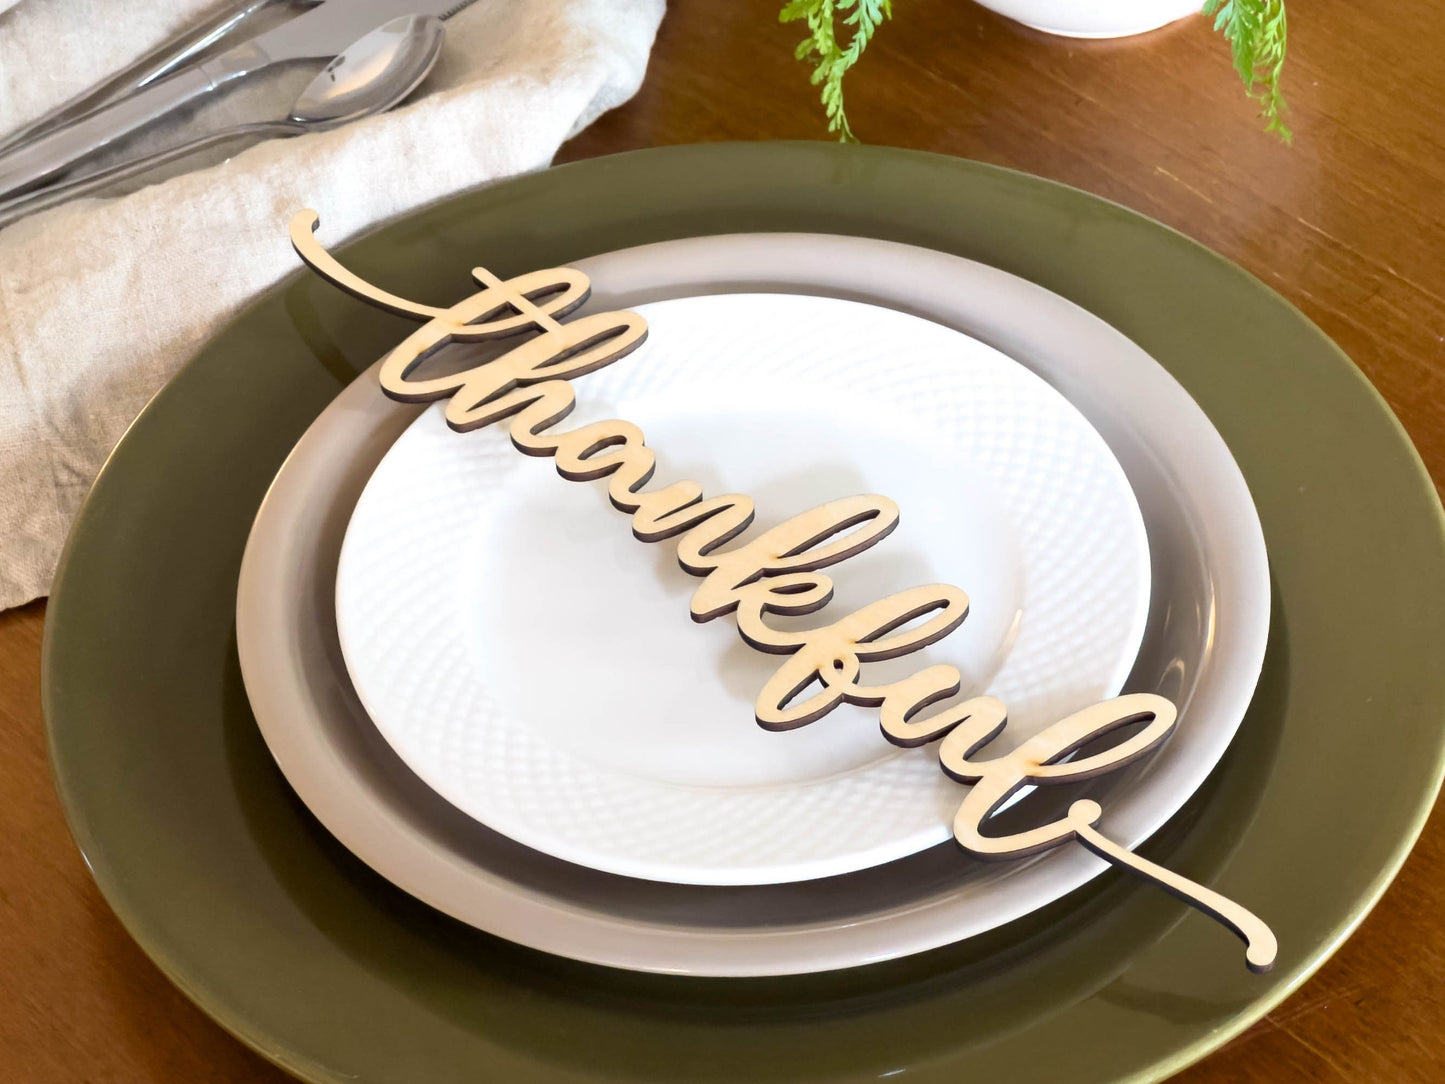 Fall Thankful/Grateful/Gather/Blessed Table Place Settings - Digital File